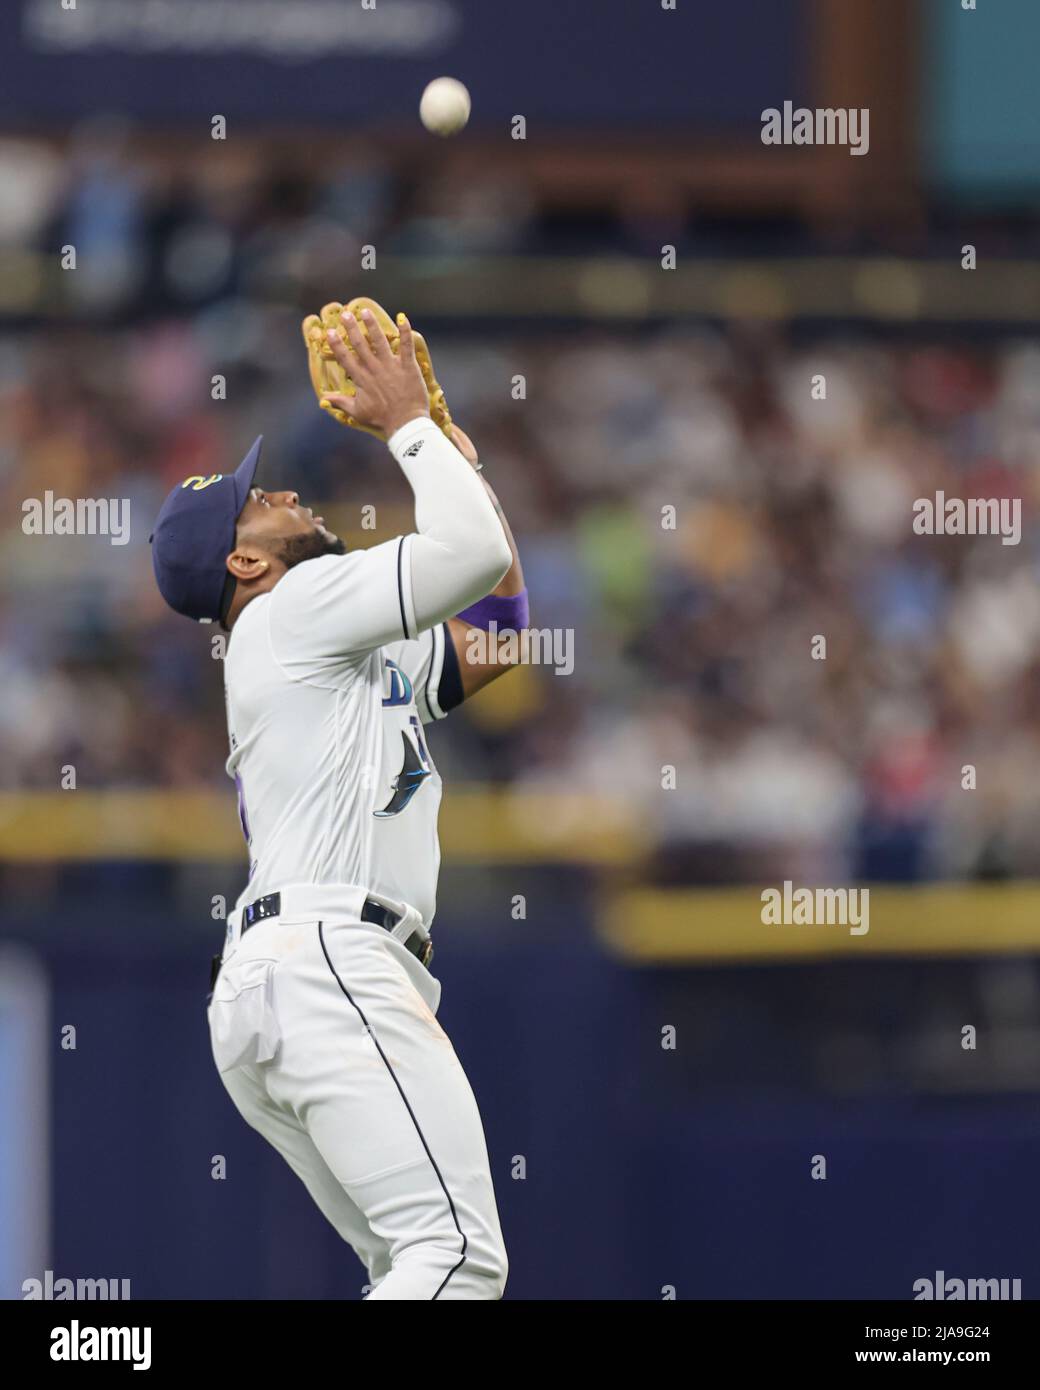 St. Petersburg, United States. 28th May, 2022. St. Petersburg, FL. USA;  Tampa Bay Rays first baseman Yandy Diaz (2) catches a pop up off the batt  of New York Yankees catcher Jose